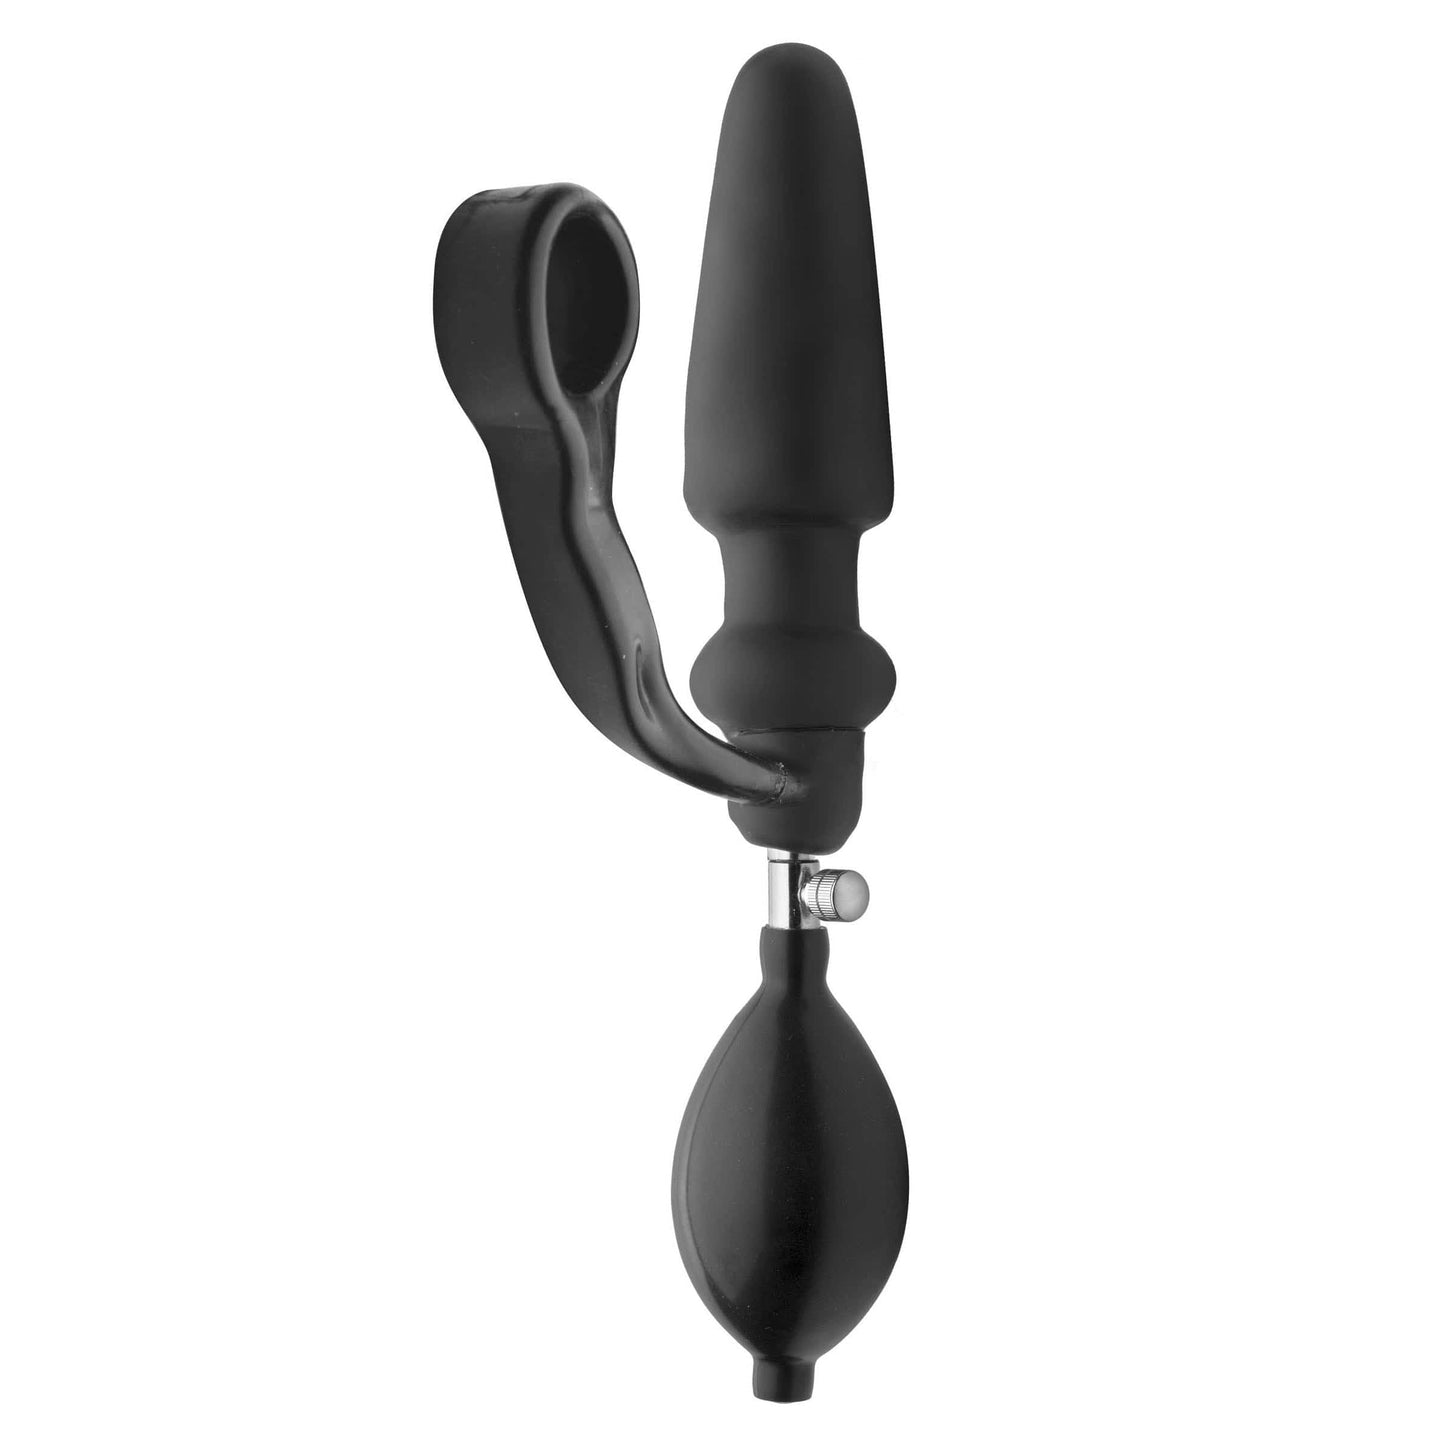 Master Series Plug Exxpander Inflatable Plug With Cock Ring And Removable Pump at the Haus of Shag